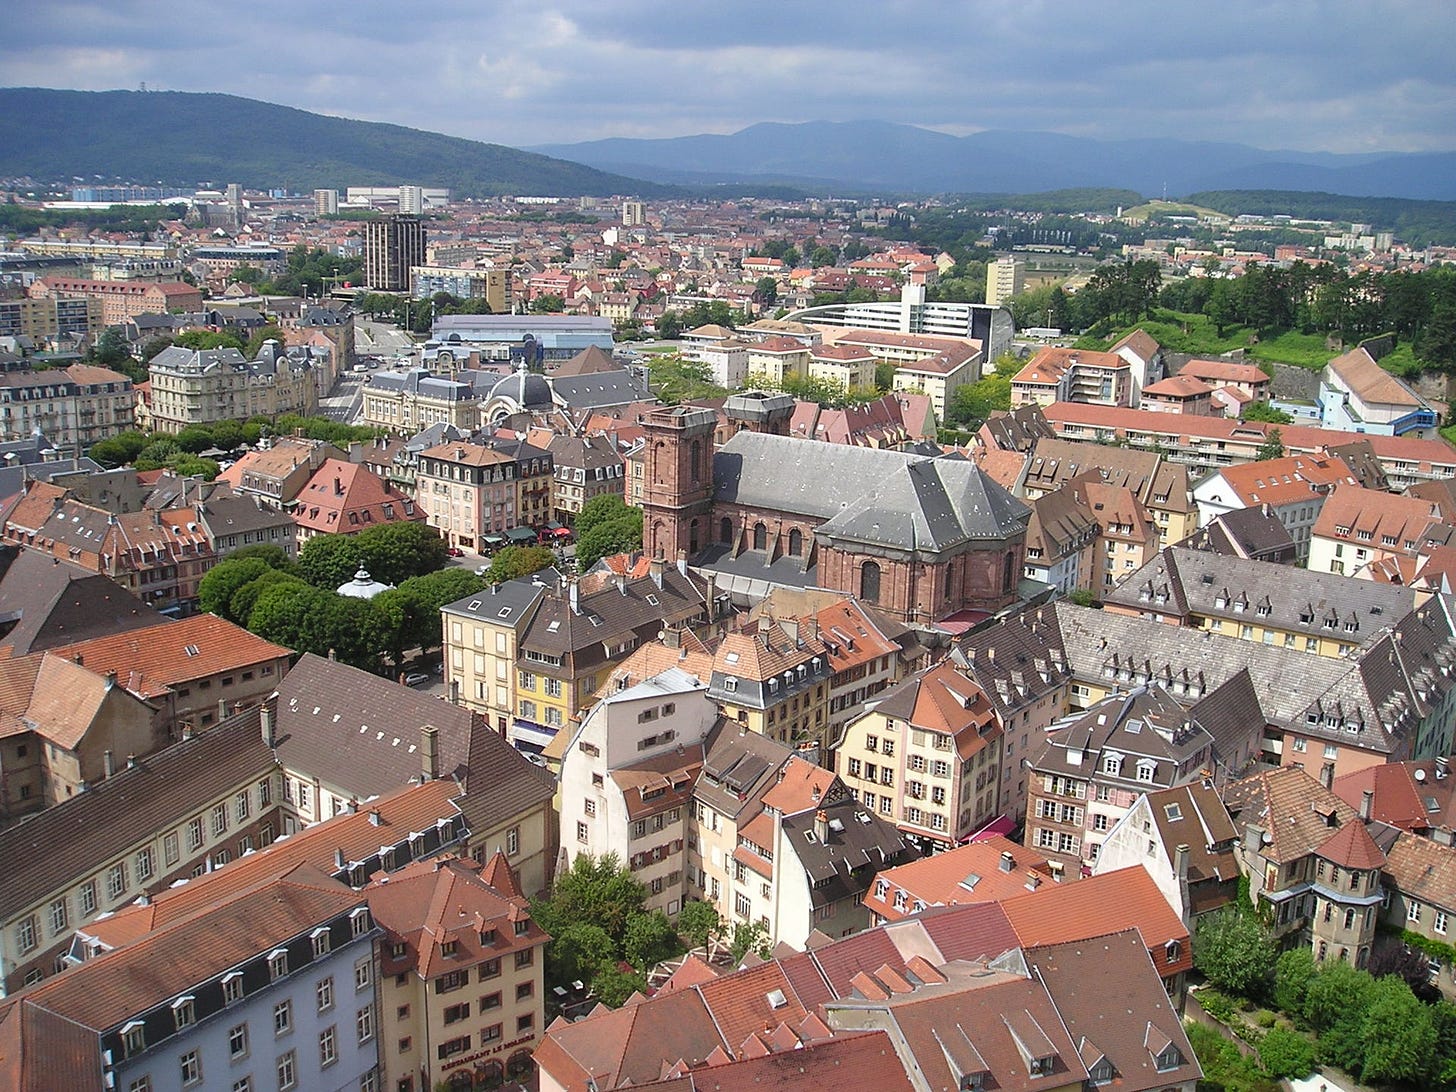 An aerial view of Belfort with the Cathedral of Saint-Christophe in the foreground